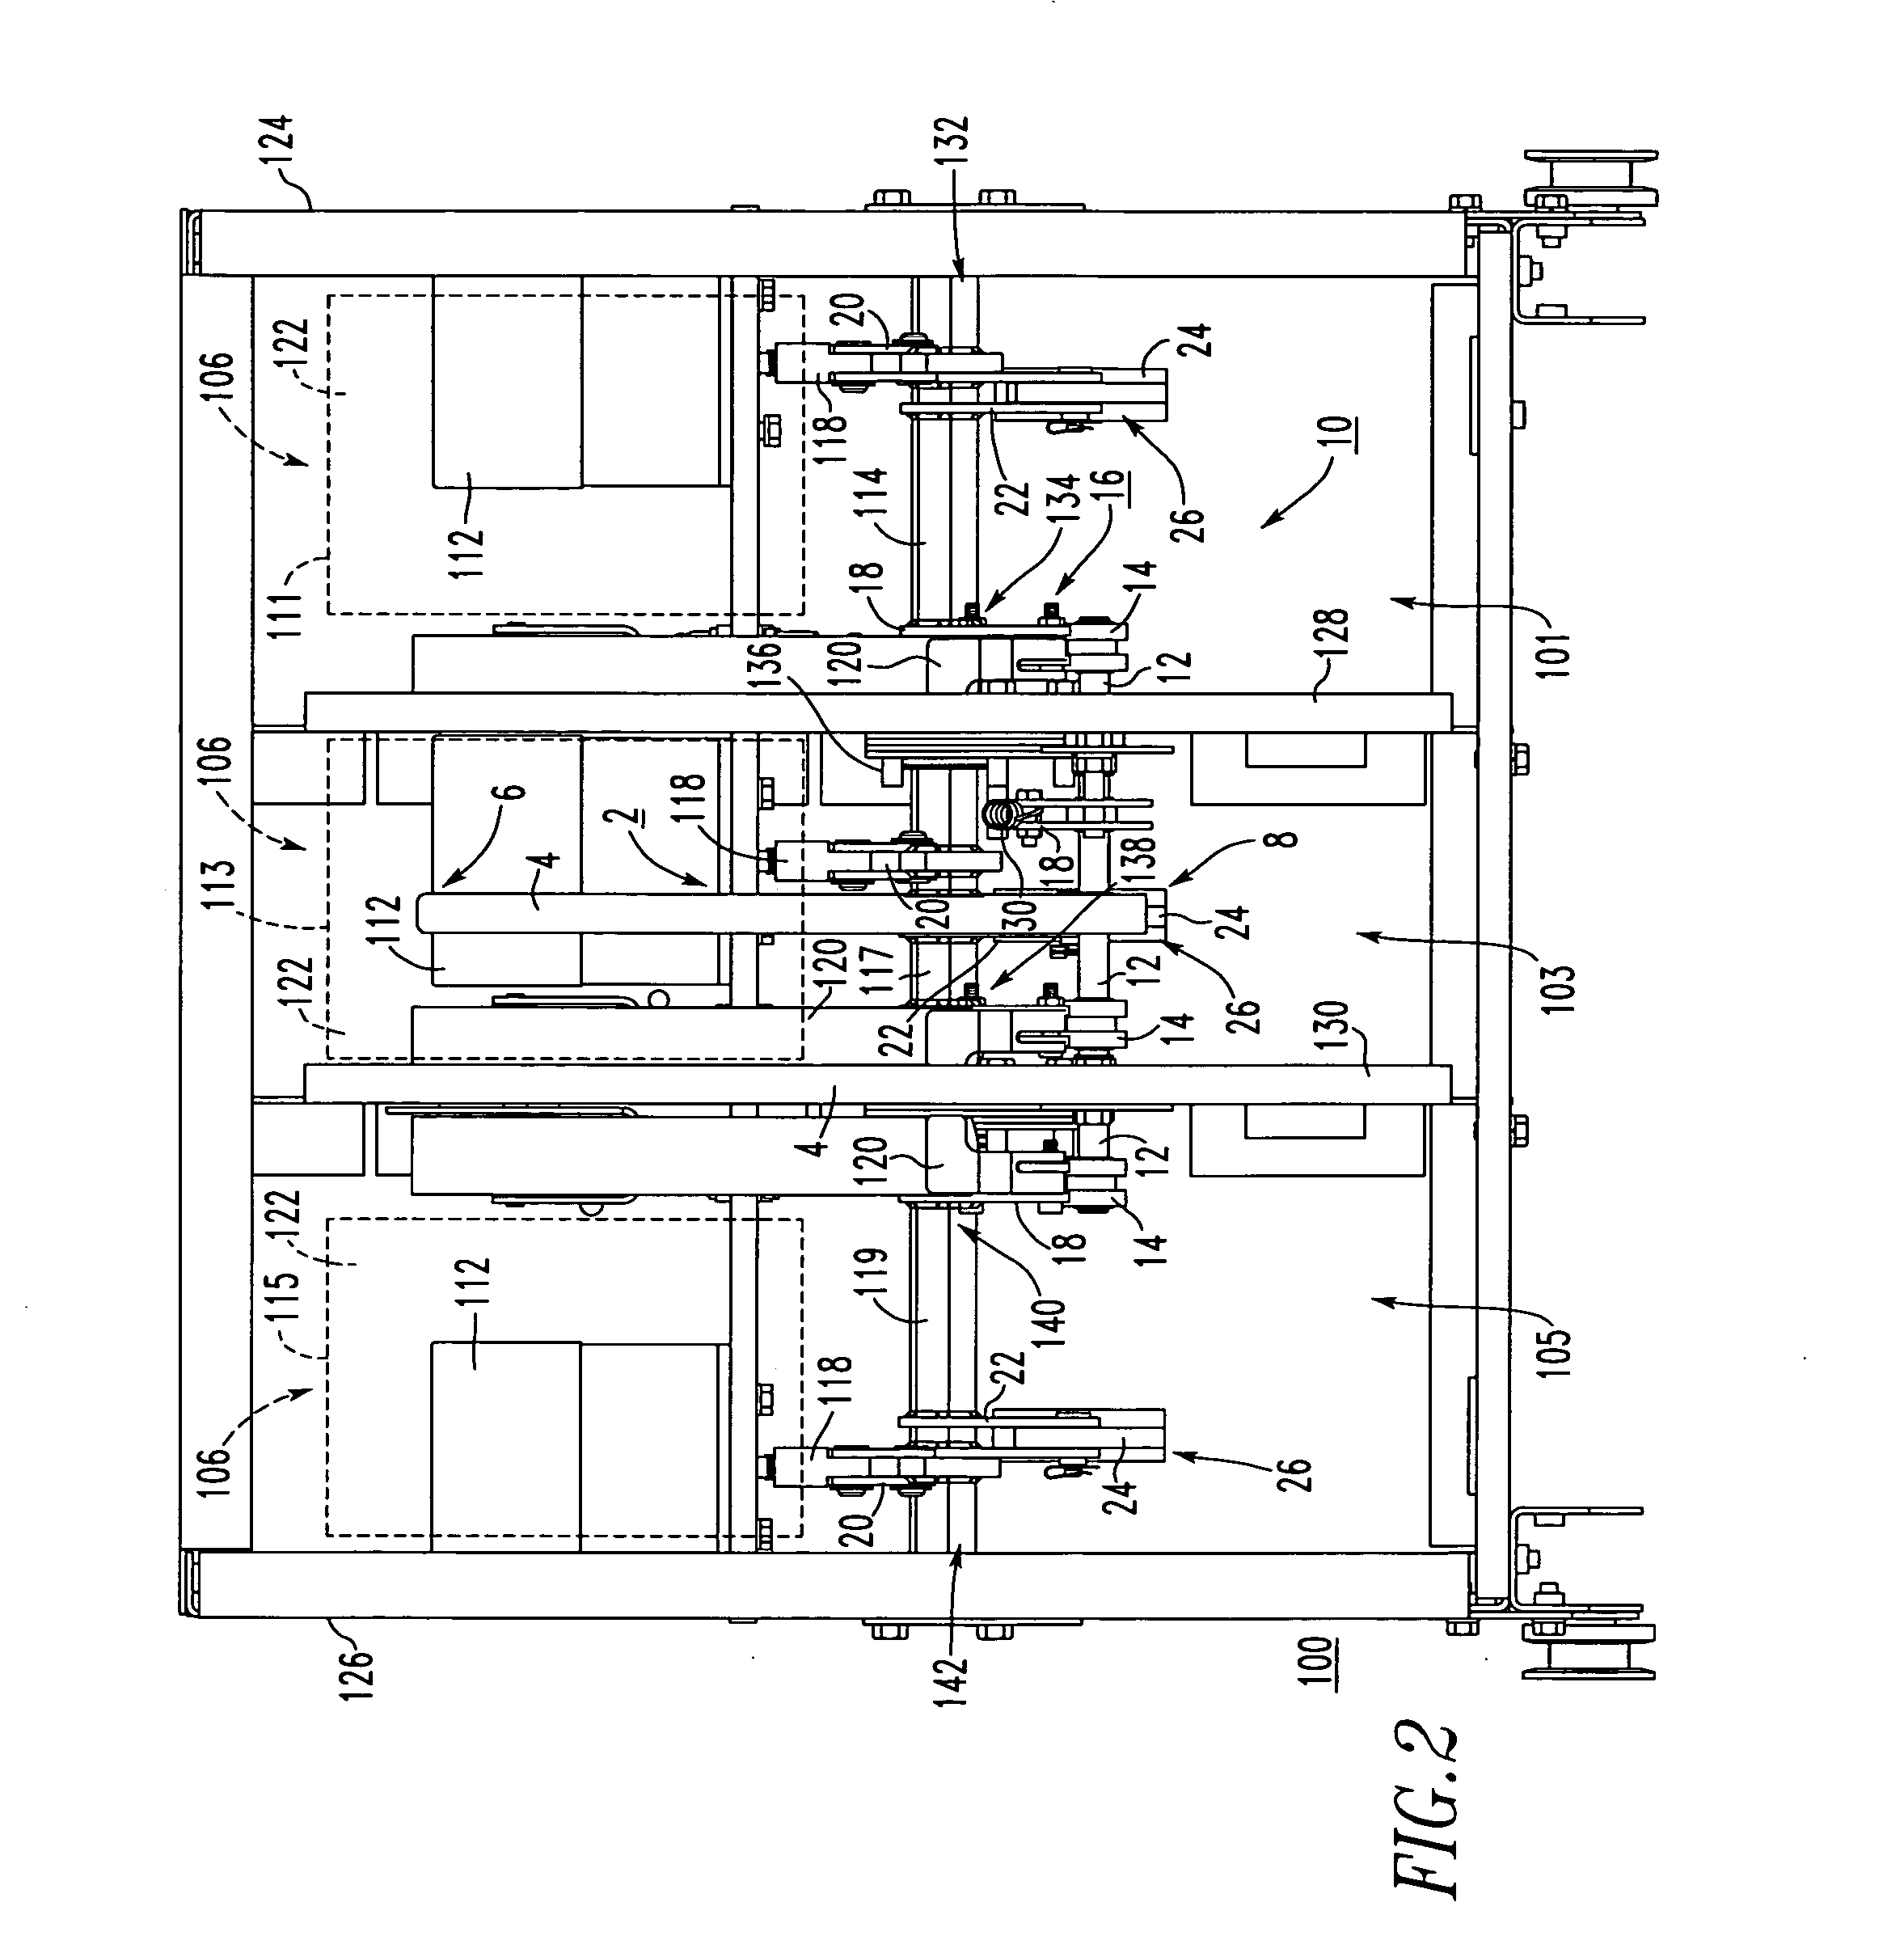 Circuit interrupter including manual selector selecting different point-on-wave switching characteristics